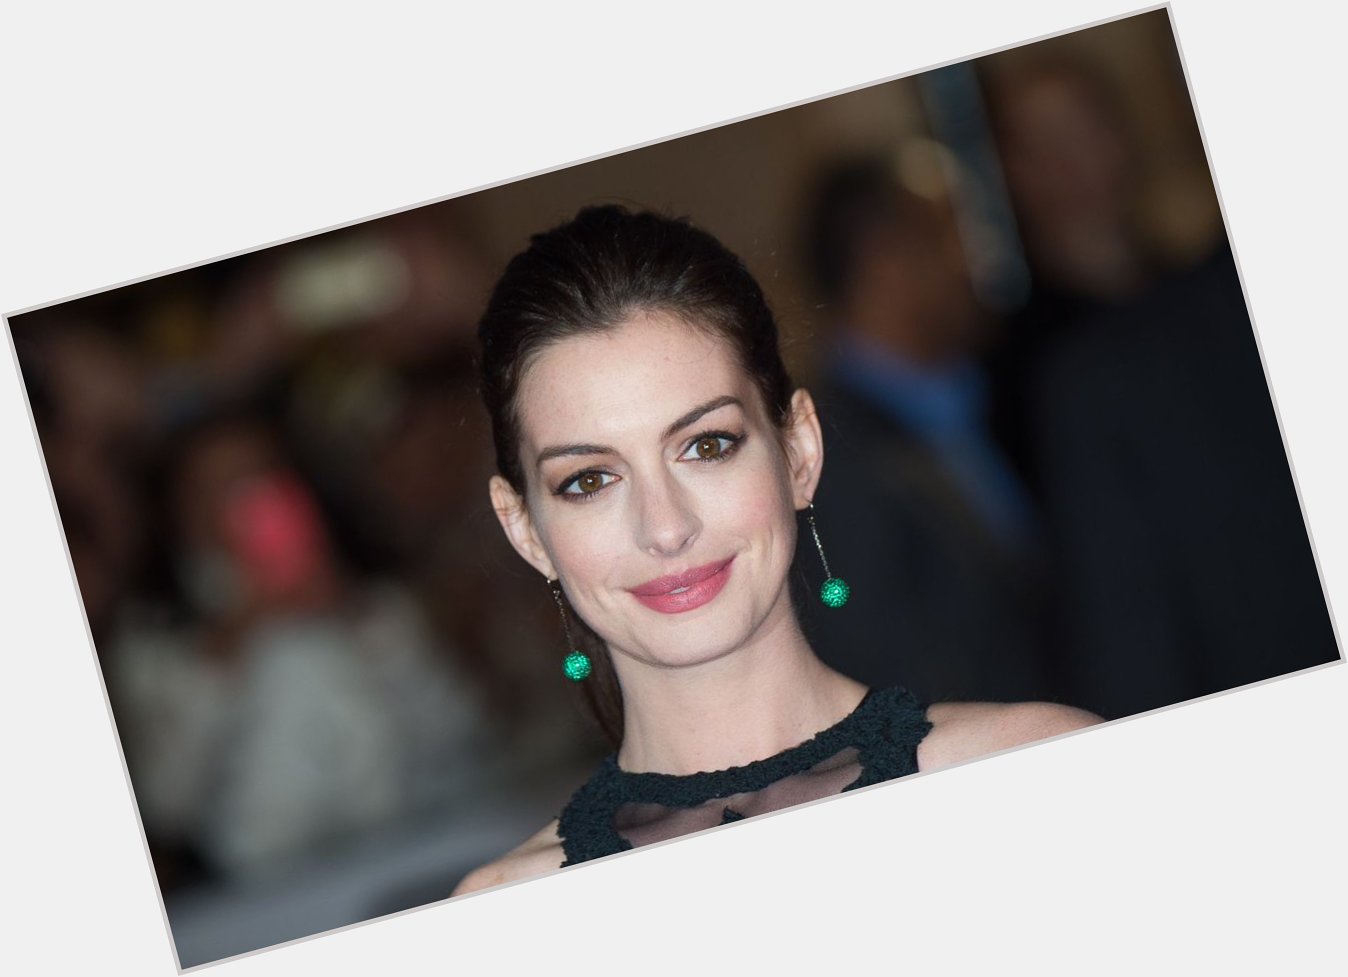  Happy Birthday To Anne Hathaway, The Queen Of Book-To-Film Adaptations  